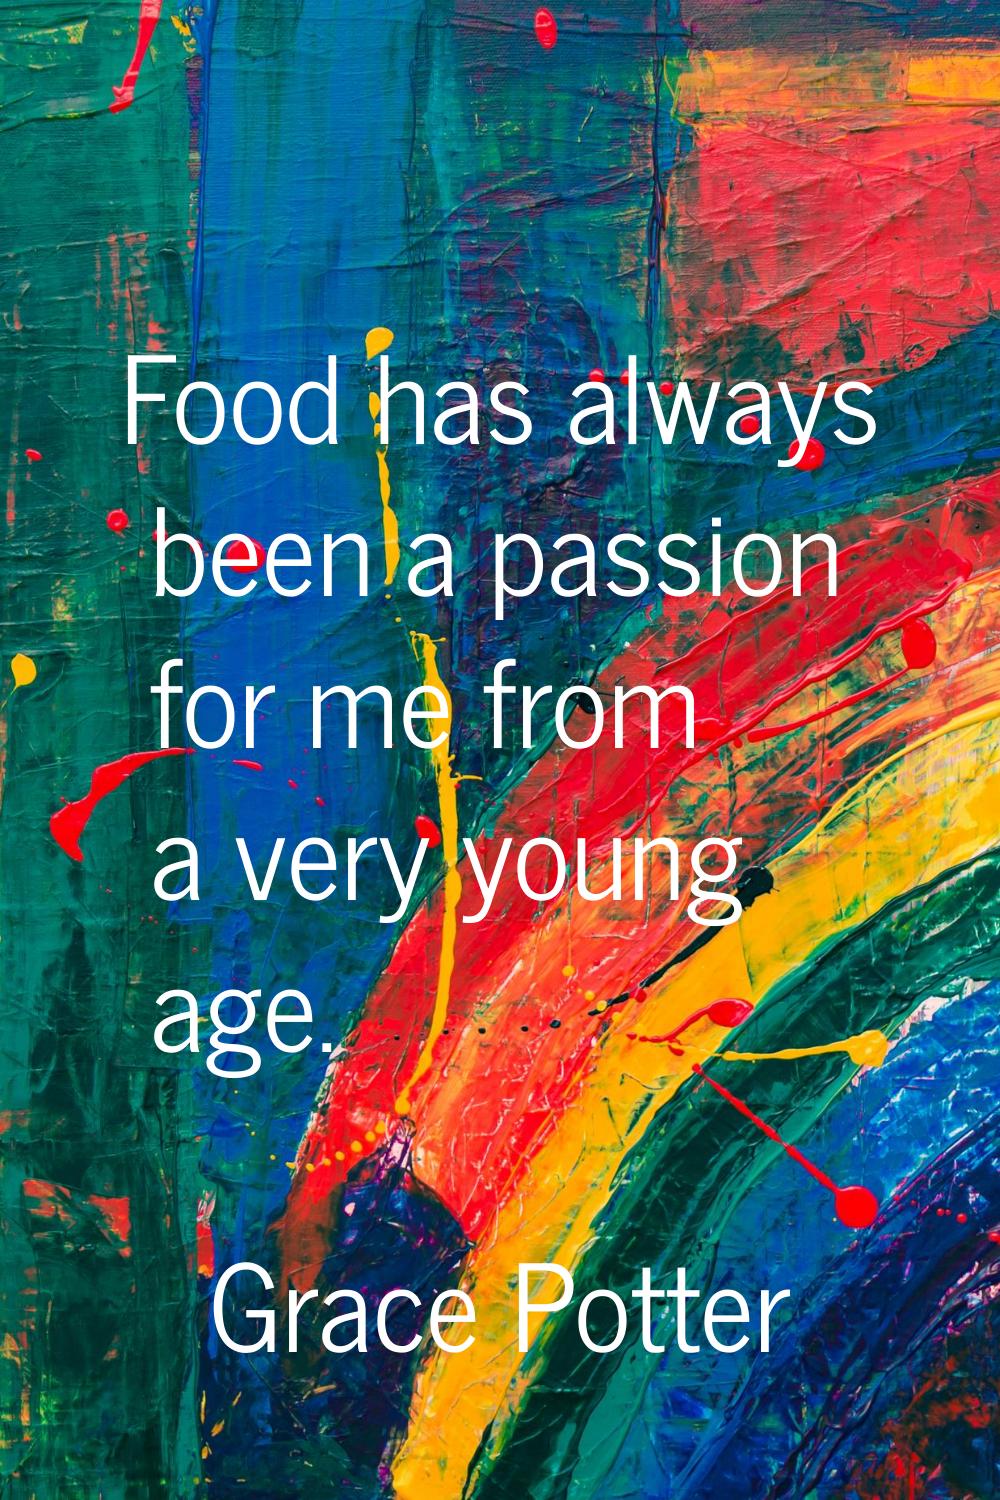 Food has always been a passion for me from a very young age.